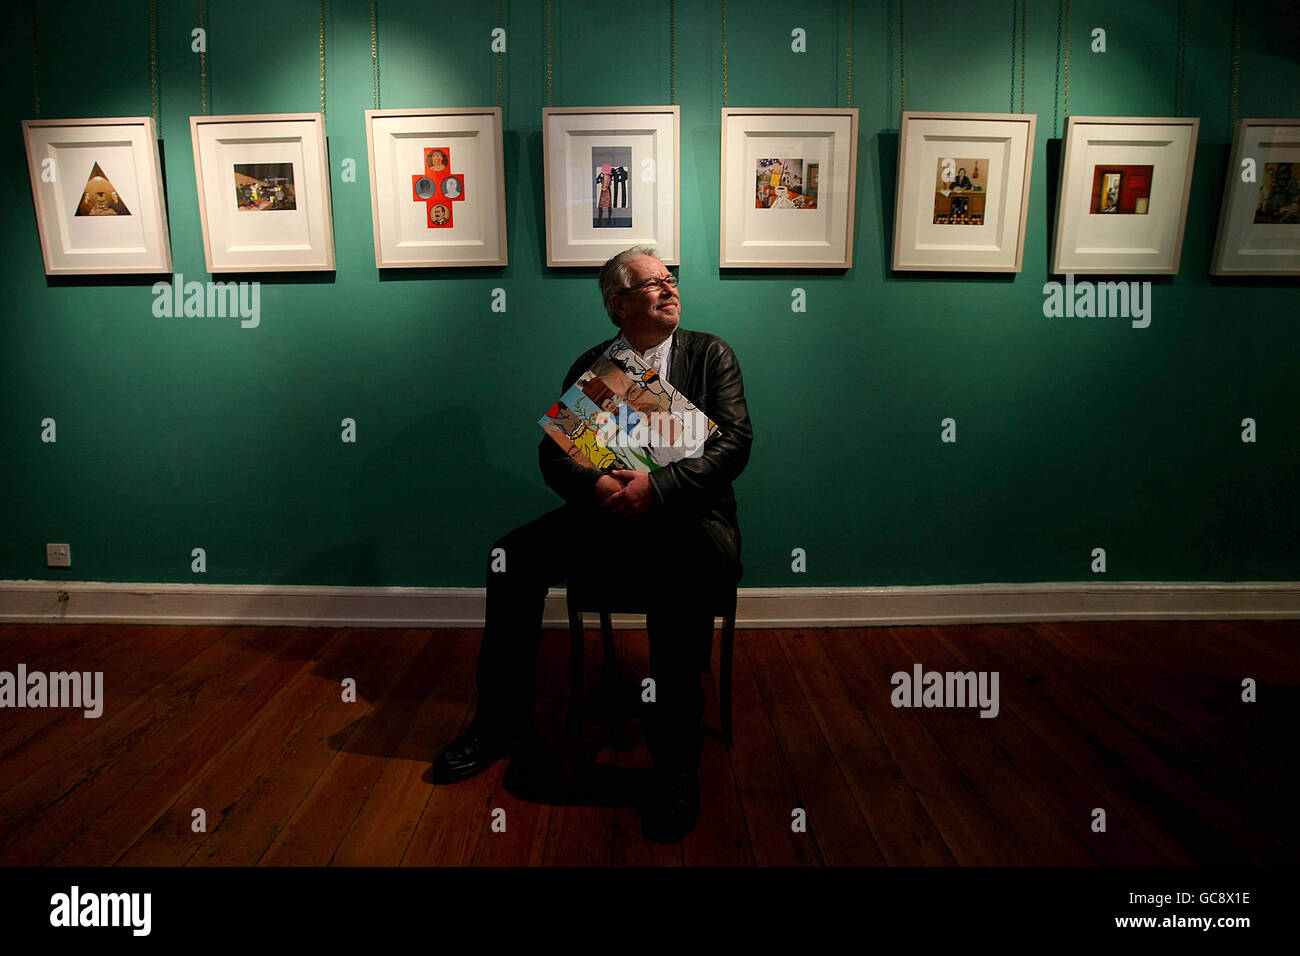 Celebrated Irish Artist Robert Ballagh sits in the Gorry Gallery, Dublin, holding a copy of his biography containing original art works and costing 2,500 Euro each. Stock Photo